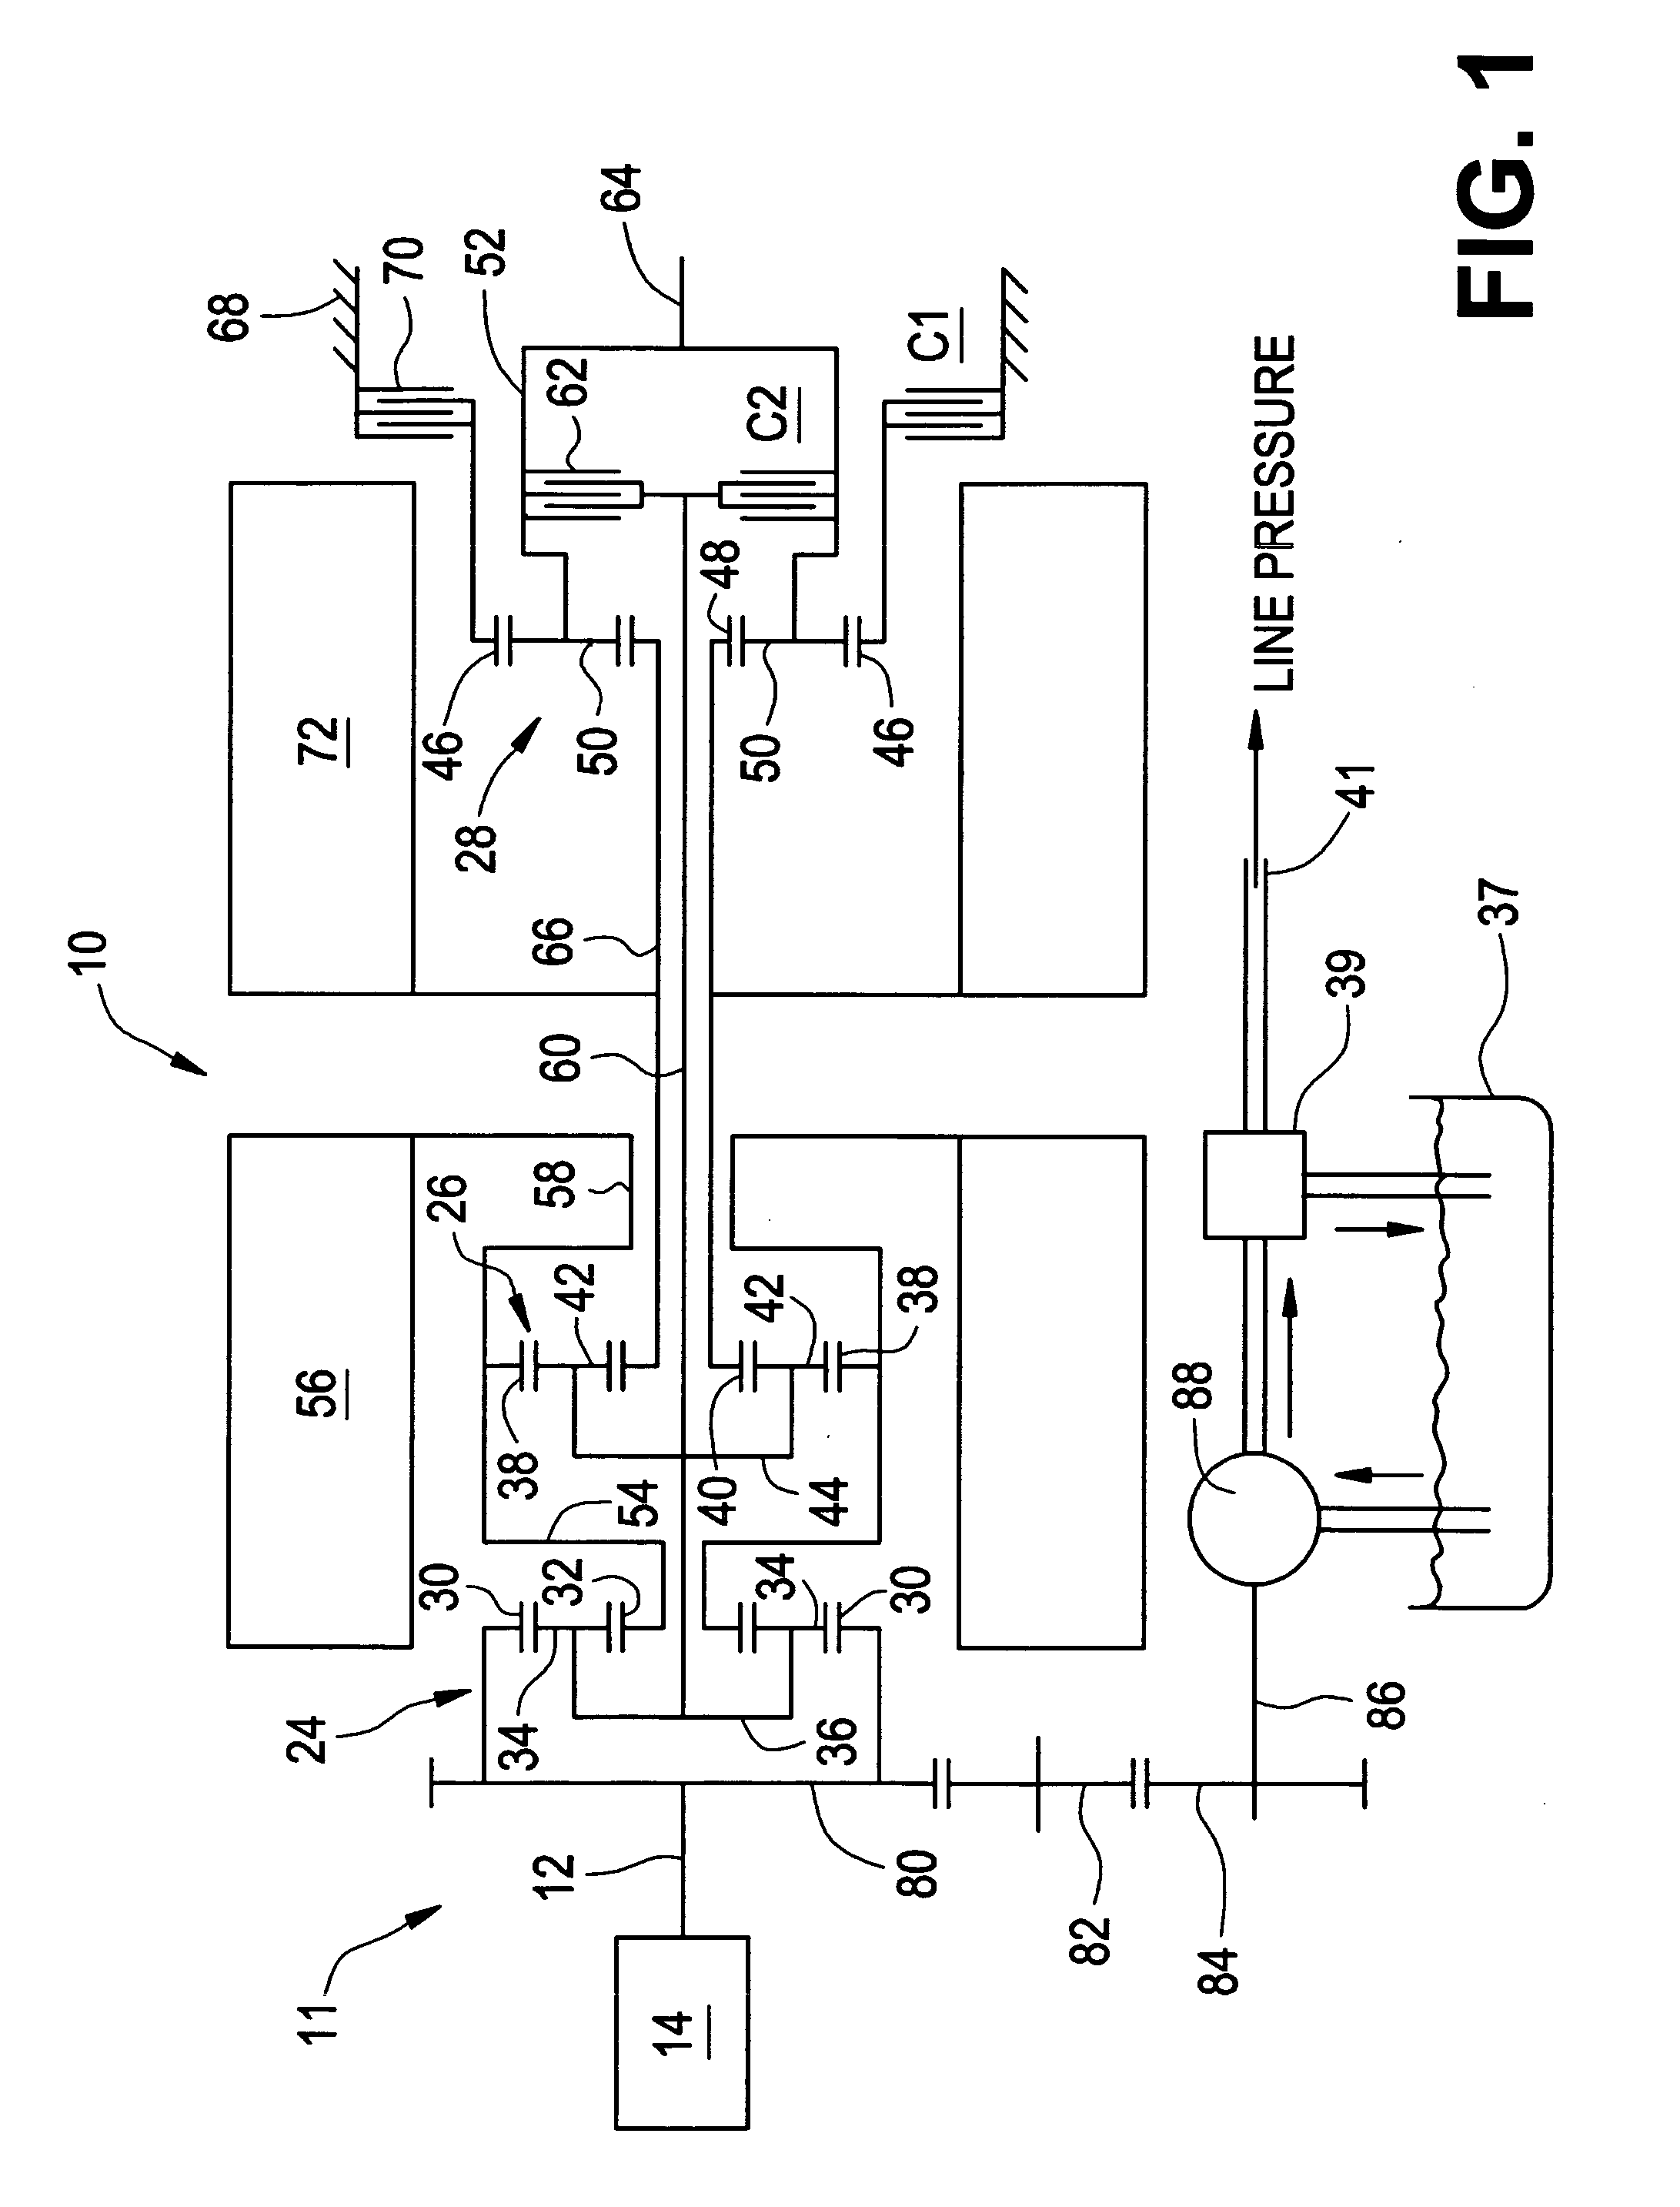 Method for dynamically determining peak output torque within battery constraints in a hybrid transmission including a parallel hybrid split